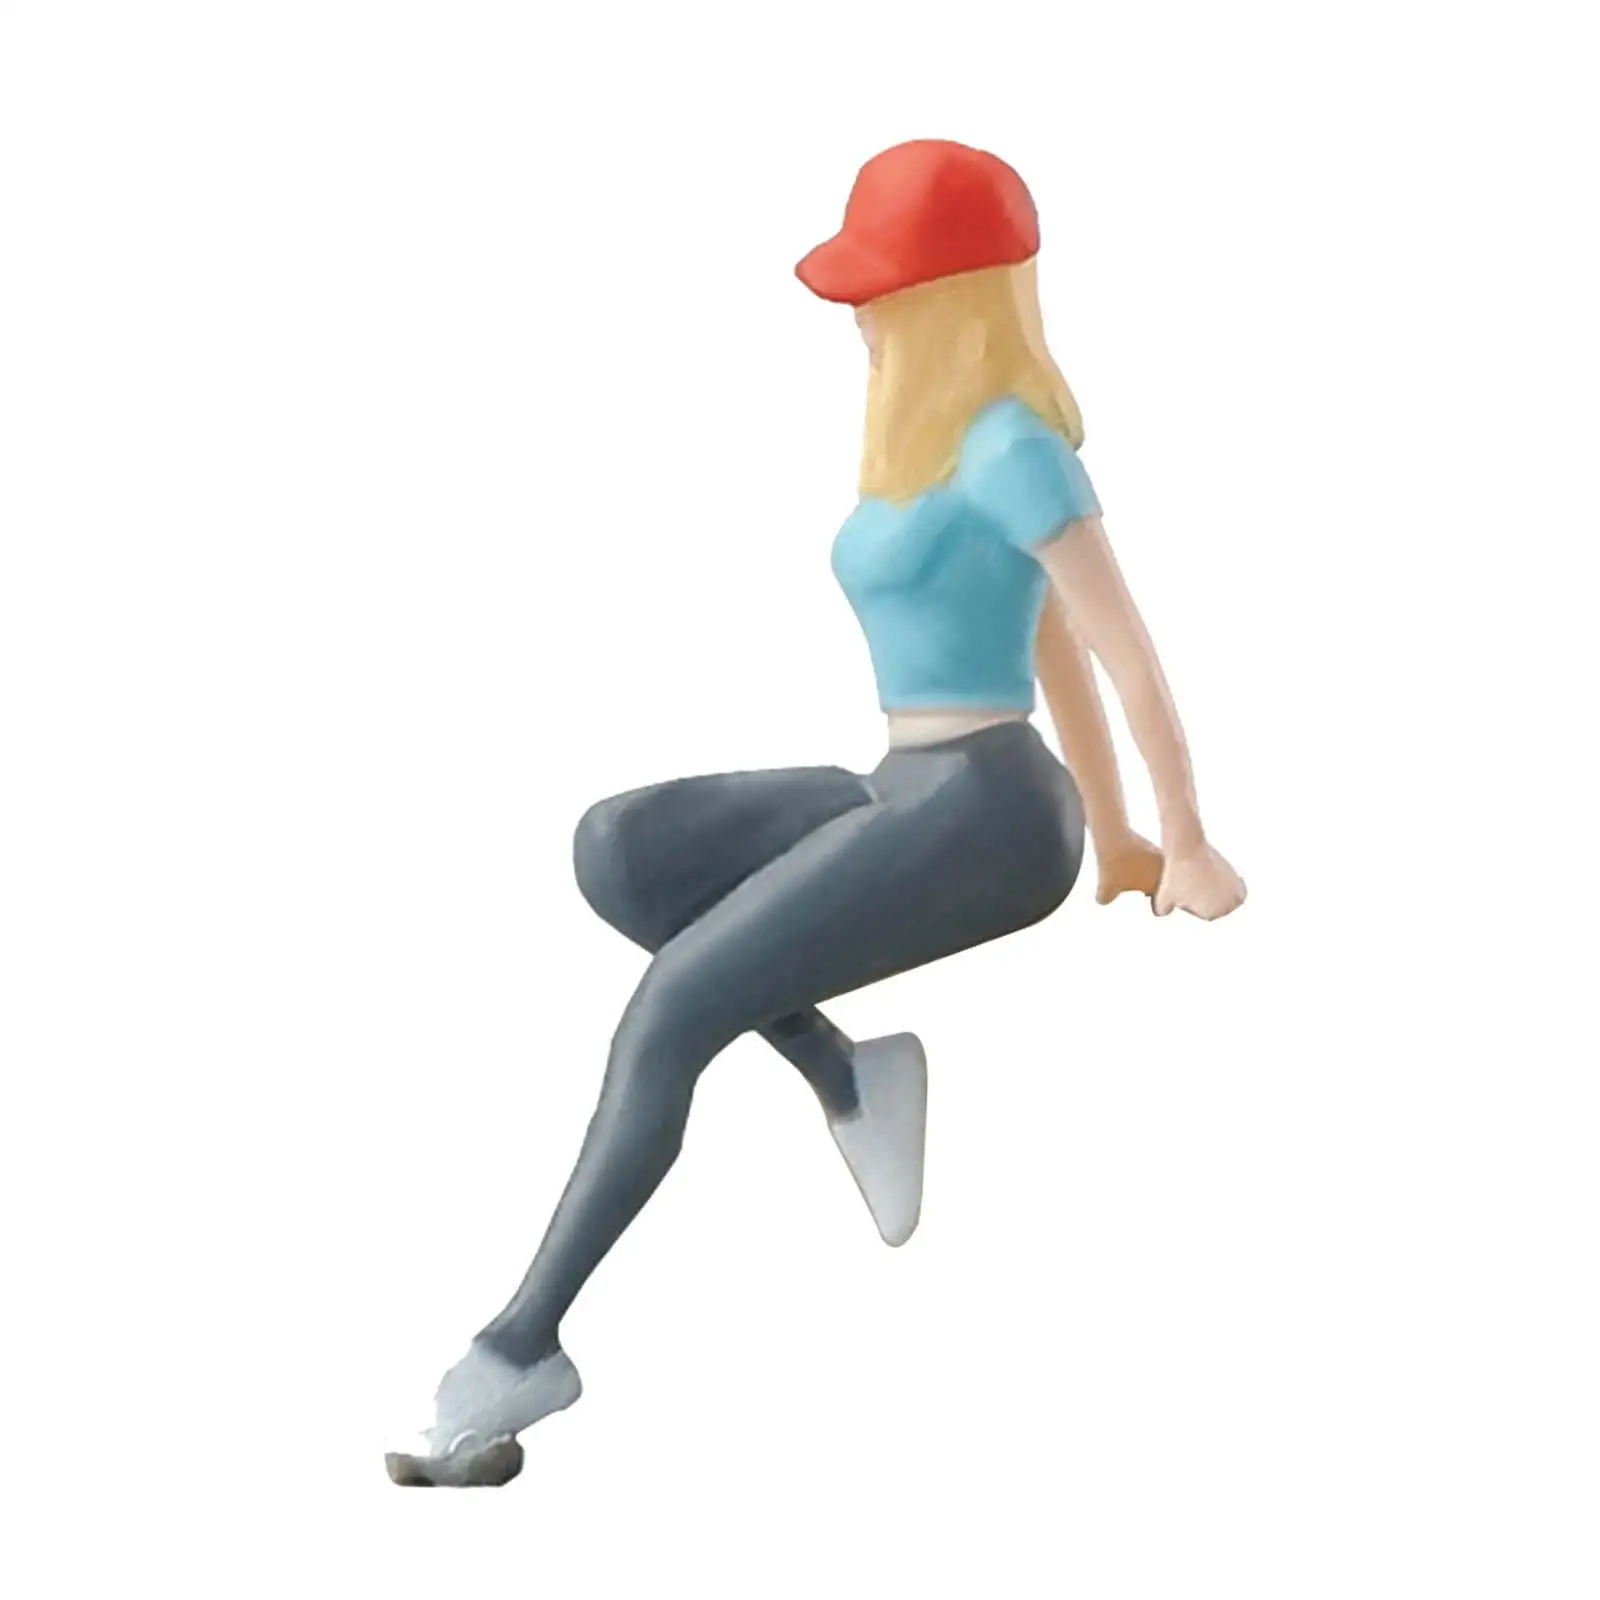 Simulated Girl Figures 1:64 Girl Figure for Train Station Layout DIY Scene